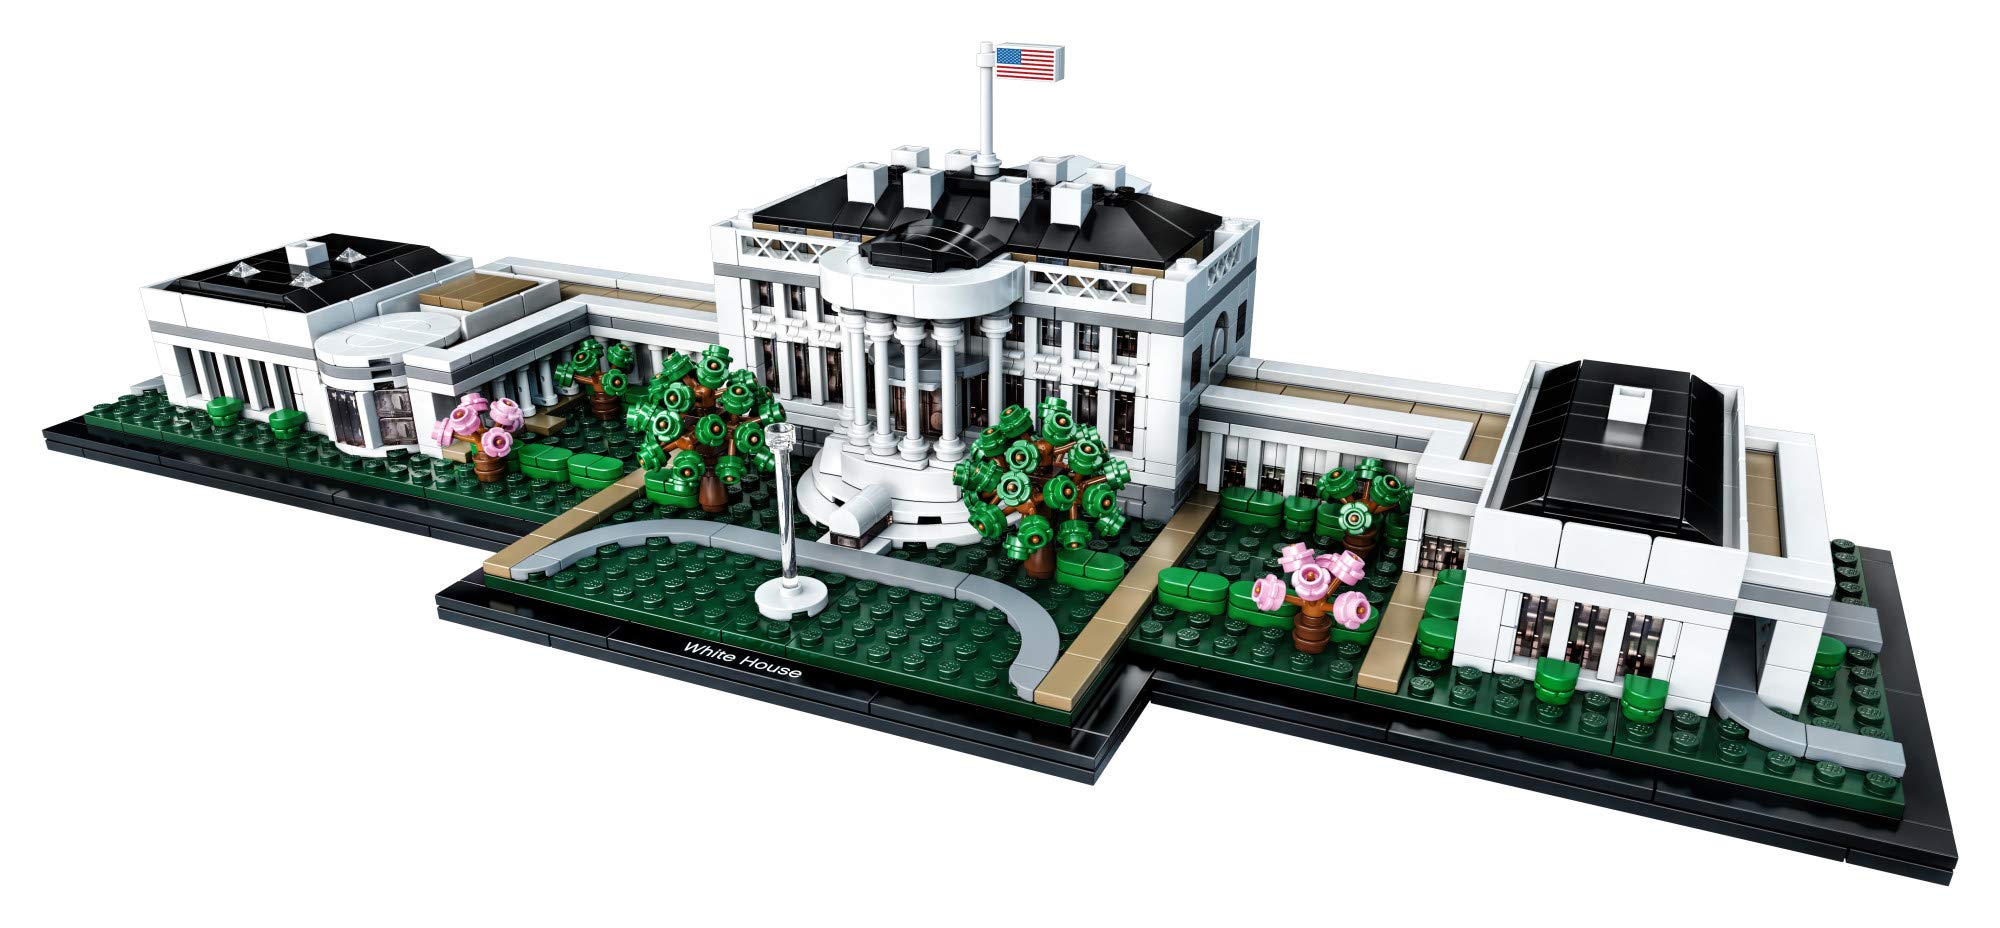 LEGO Architecture: The White House 21054 (Like New, Open Box)